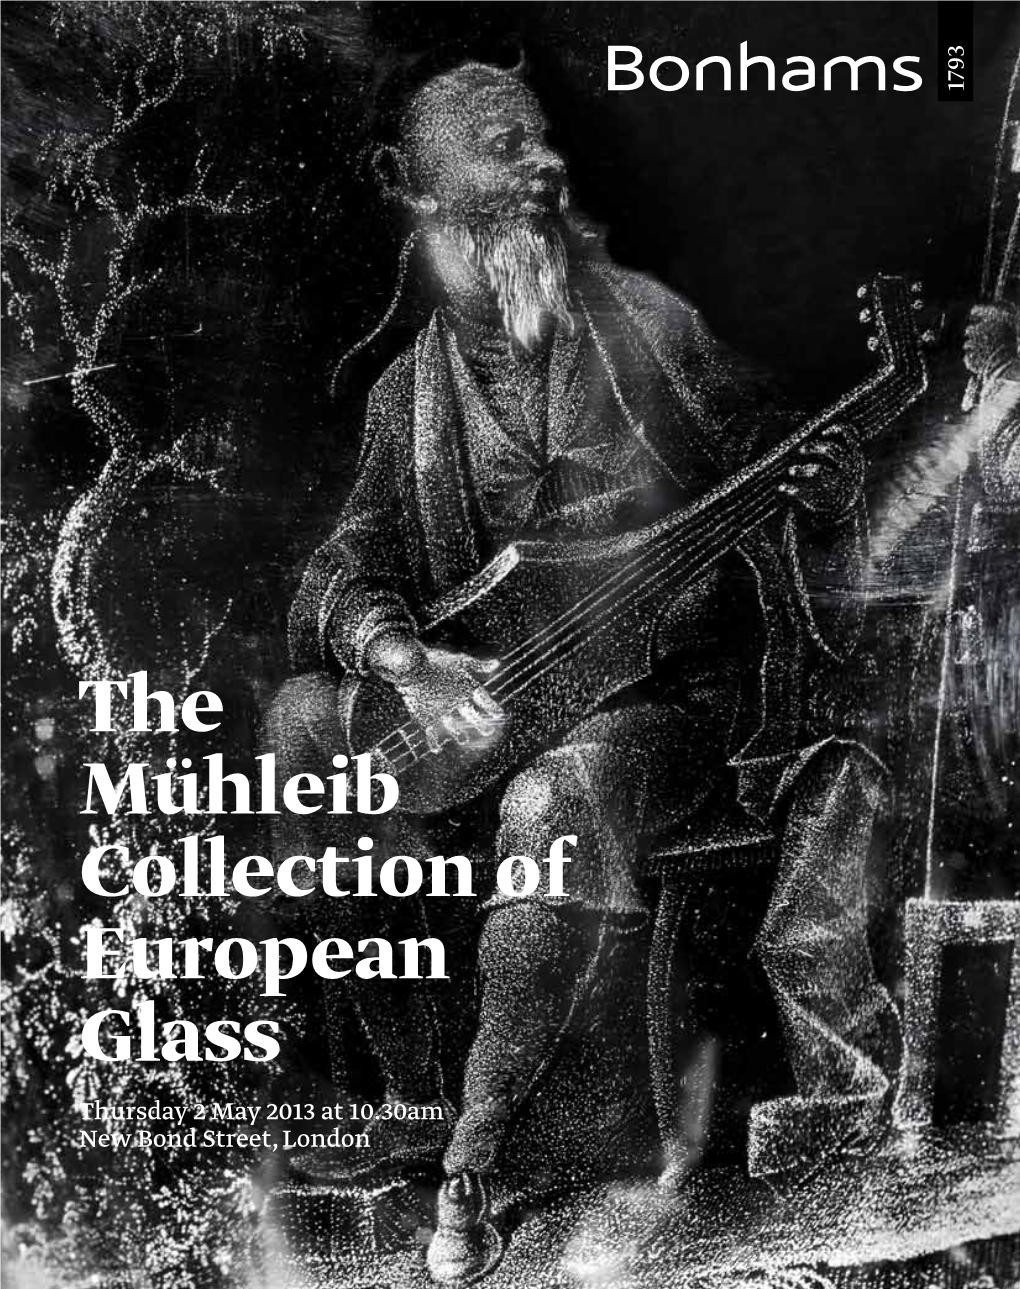 The Mühleib Collection of European Glass Thursday 2 May 2013 at 10.30Am New Bond Street, London